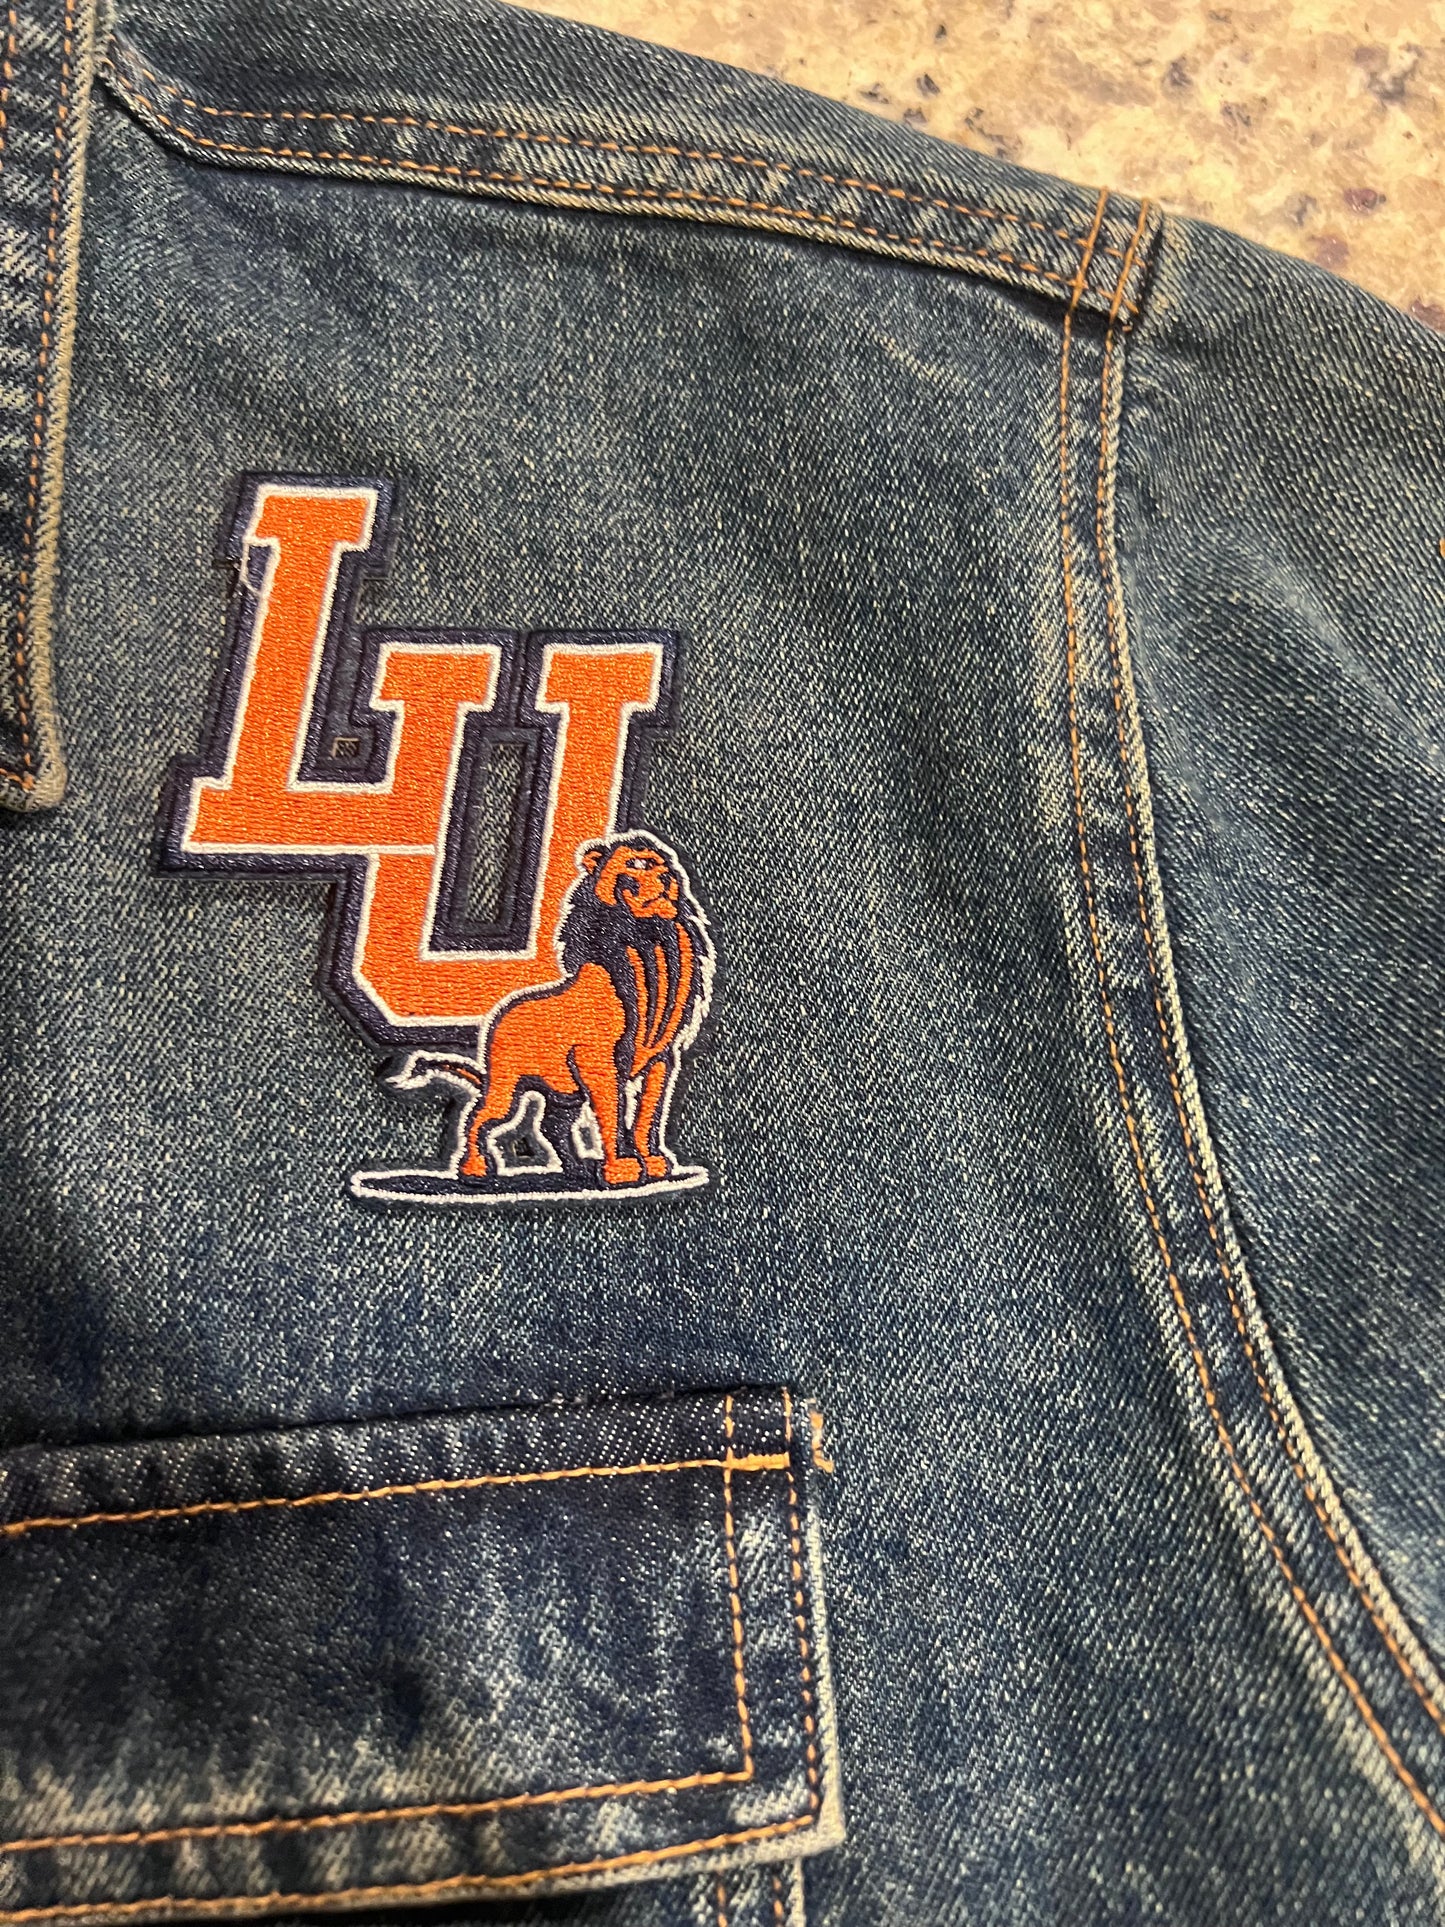 Lincoln University Iron On Patch